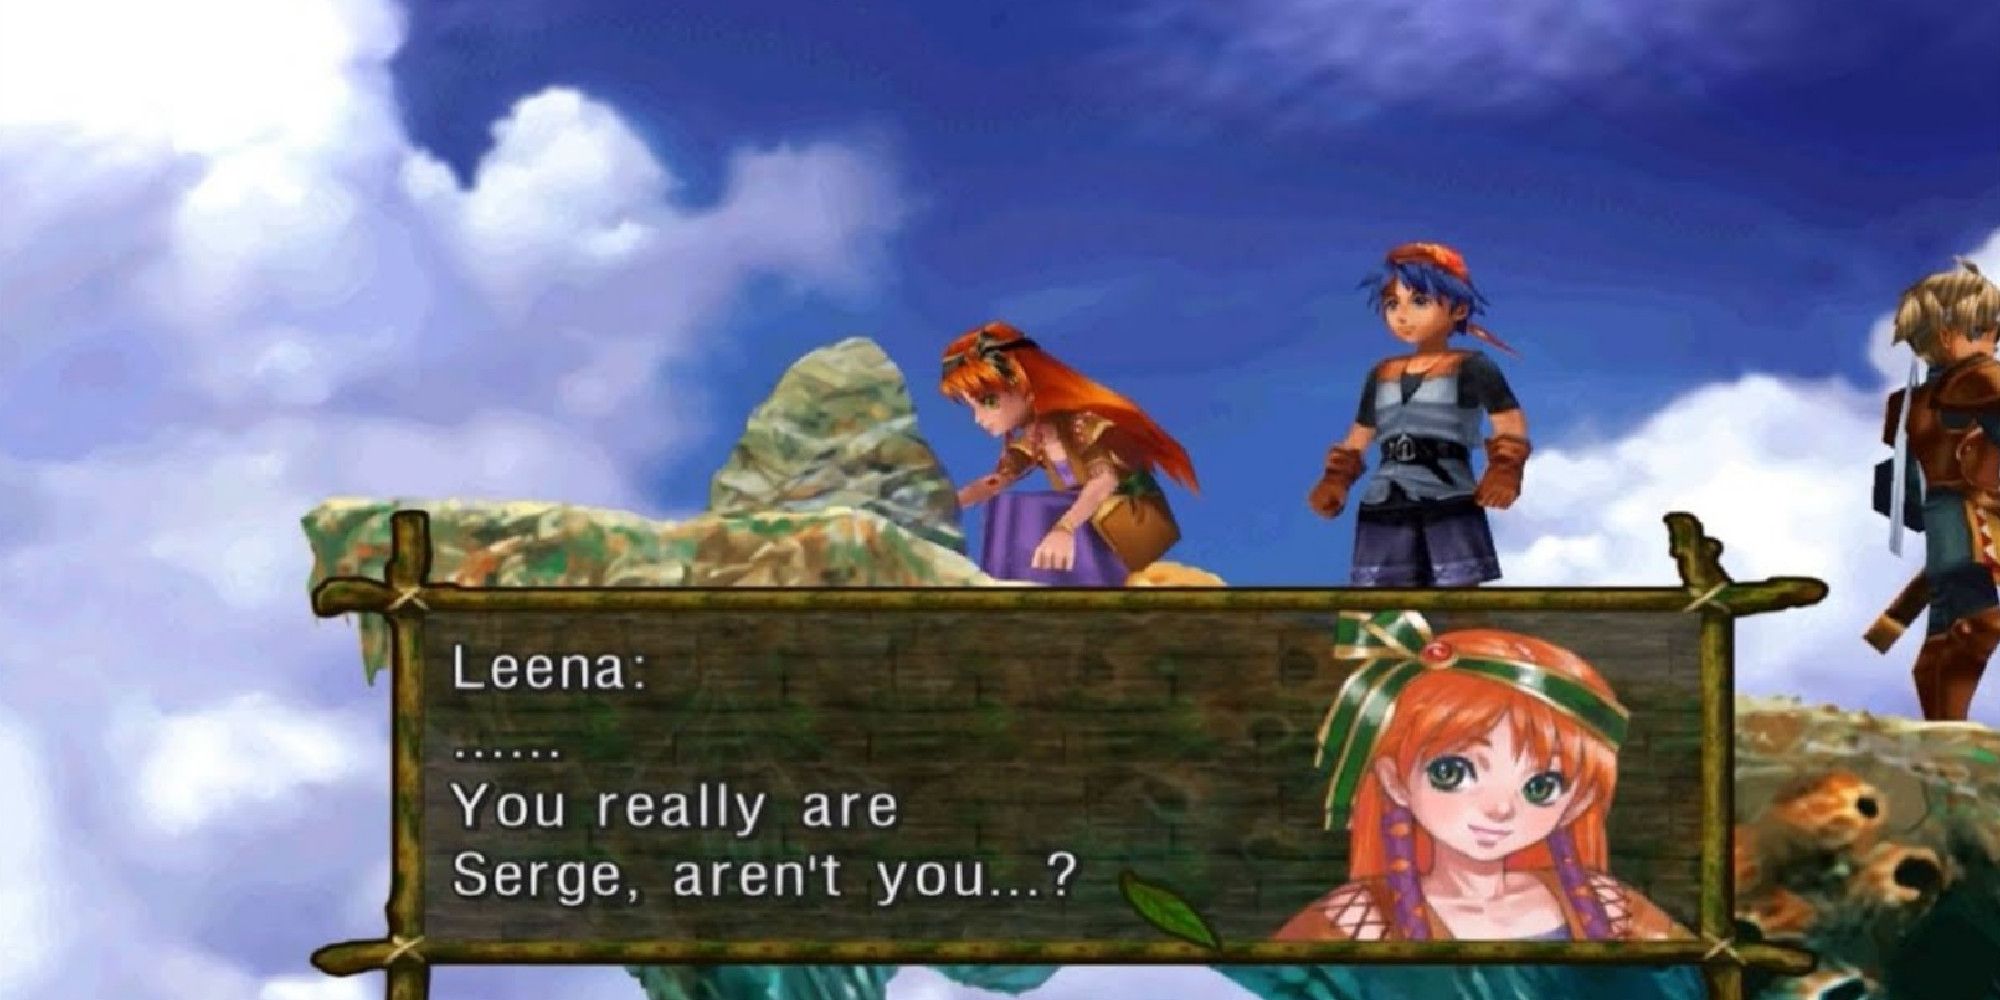 Leena gazes at Serge's mural and realizes that he is who he says he is in Chrono Cross